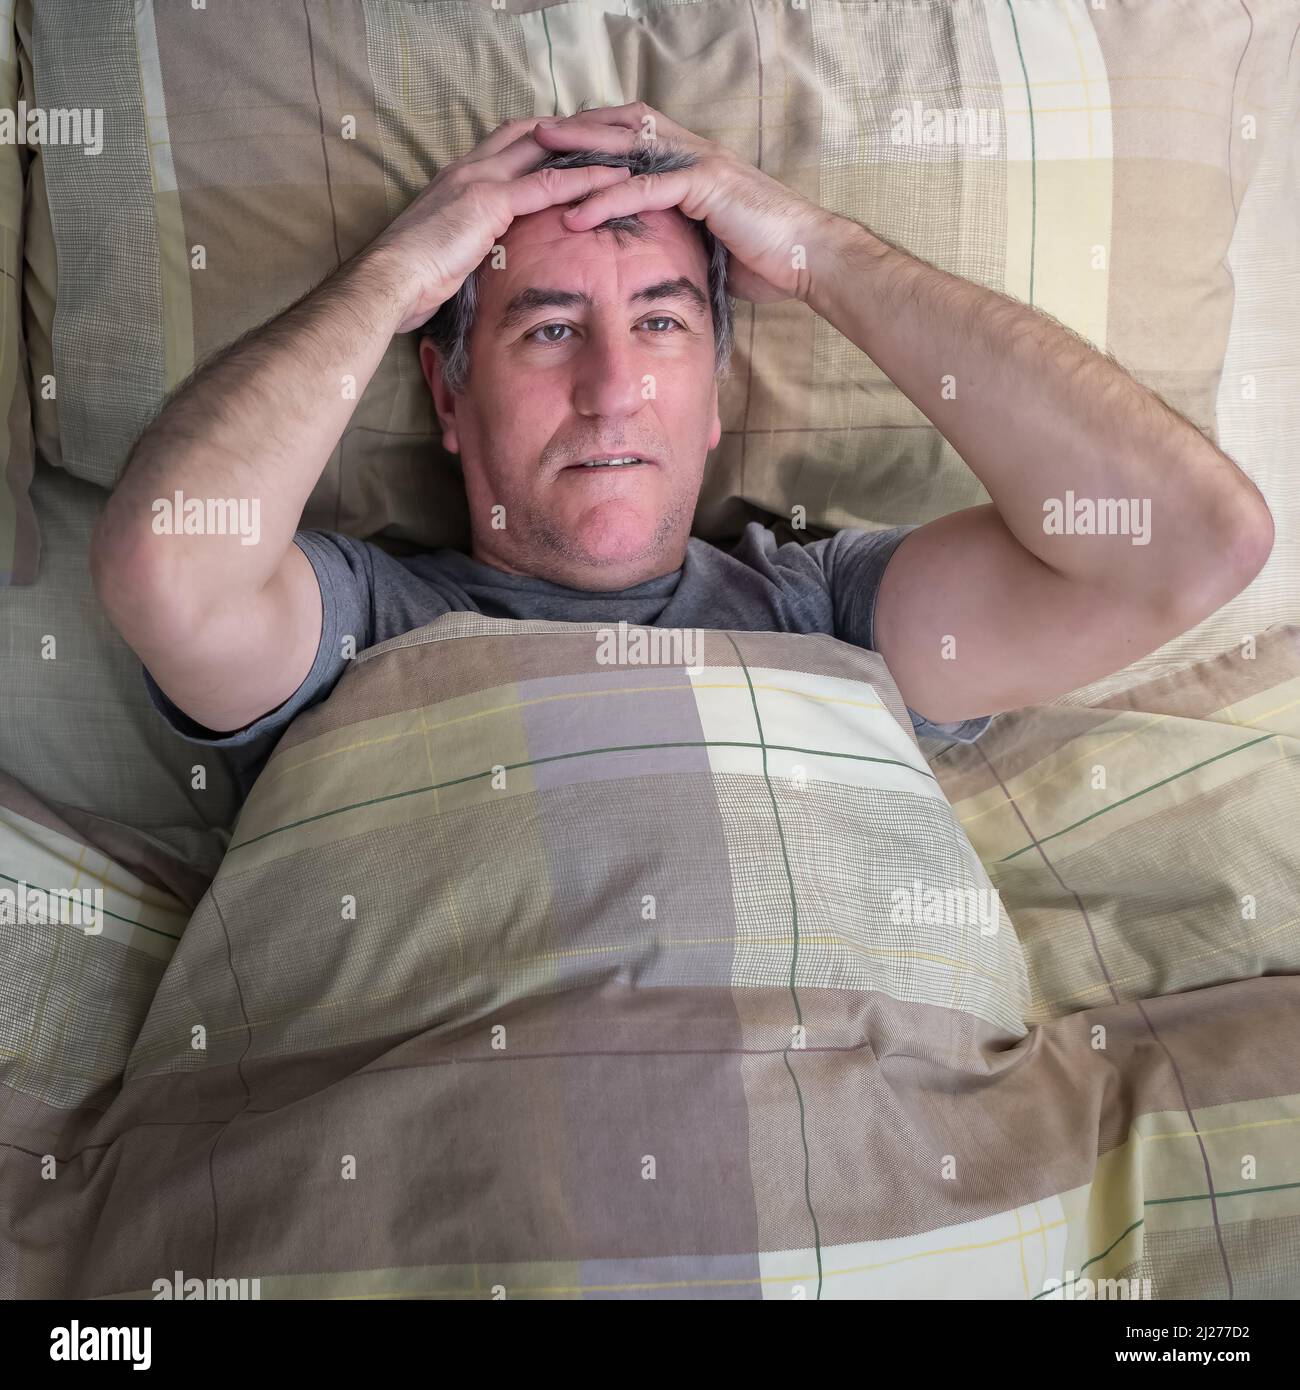 Man with insomnia lying in bed and staring at the ceiling. Stock Photo